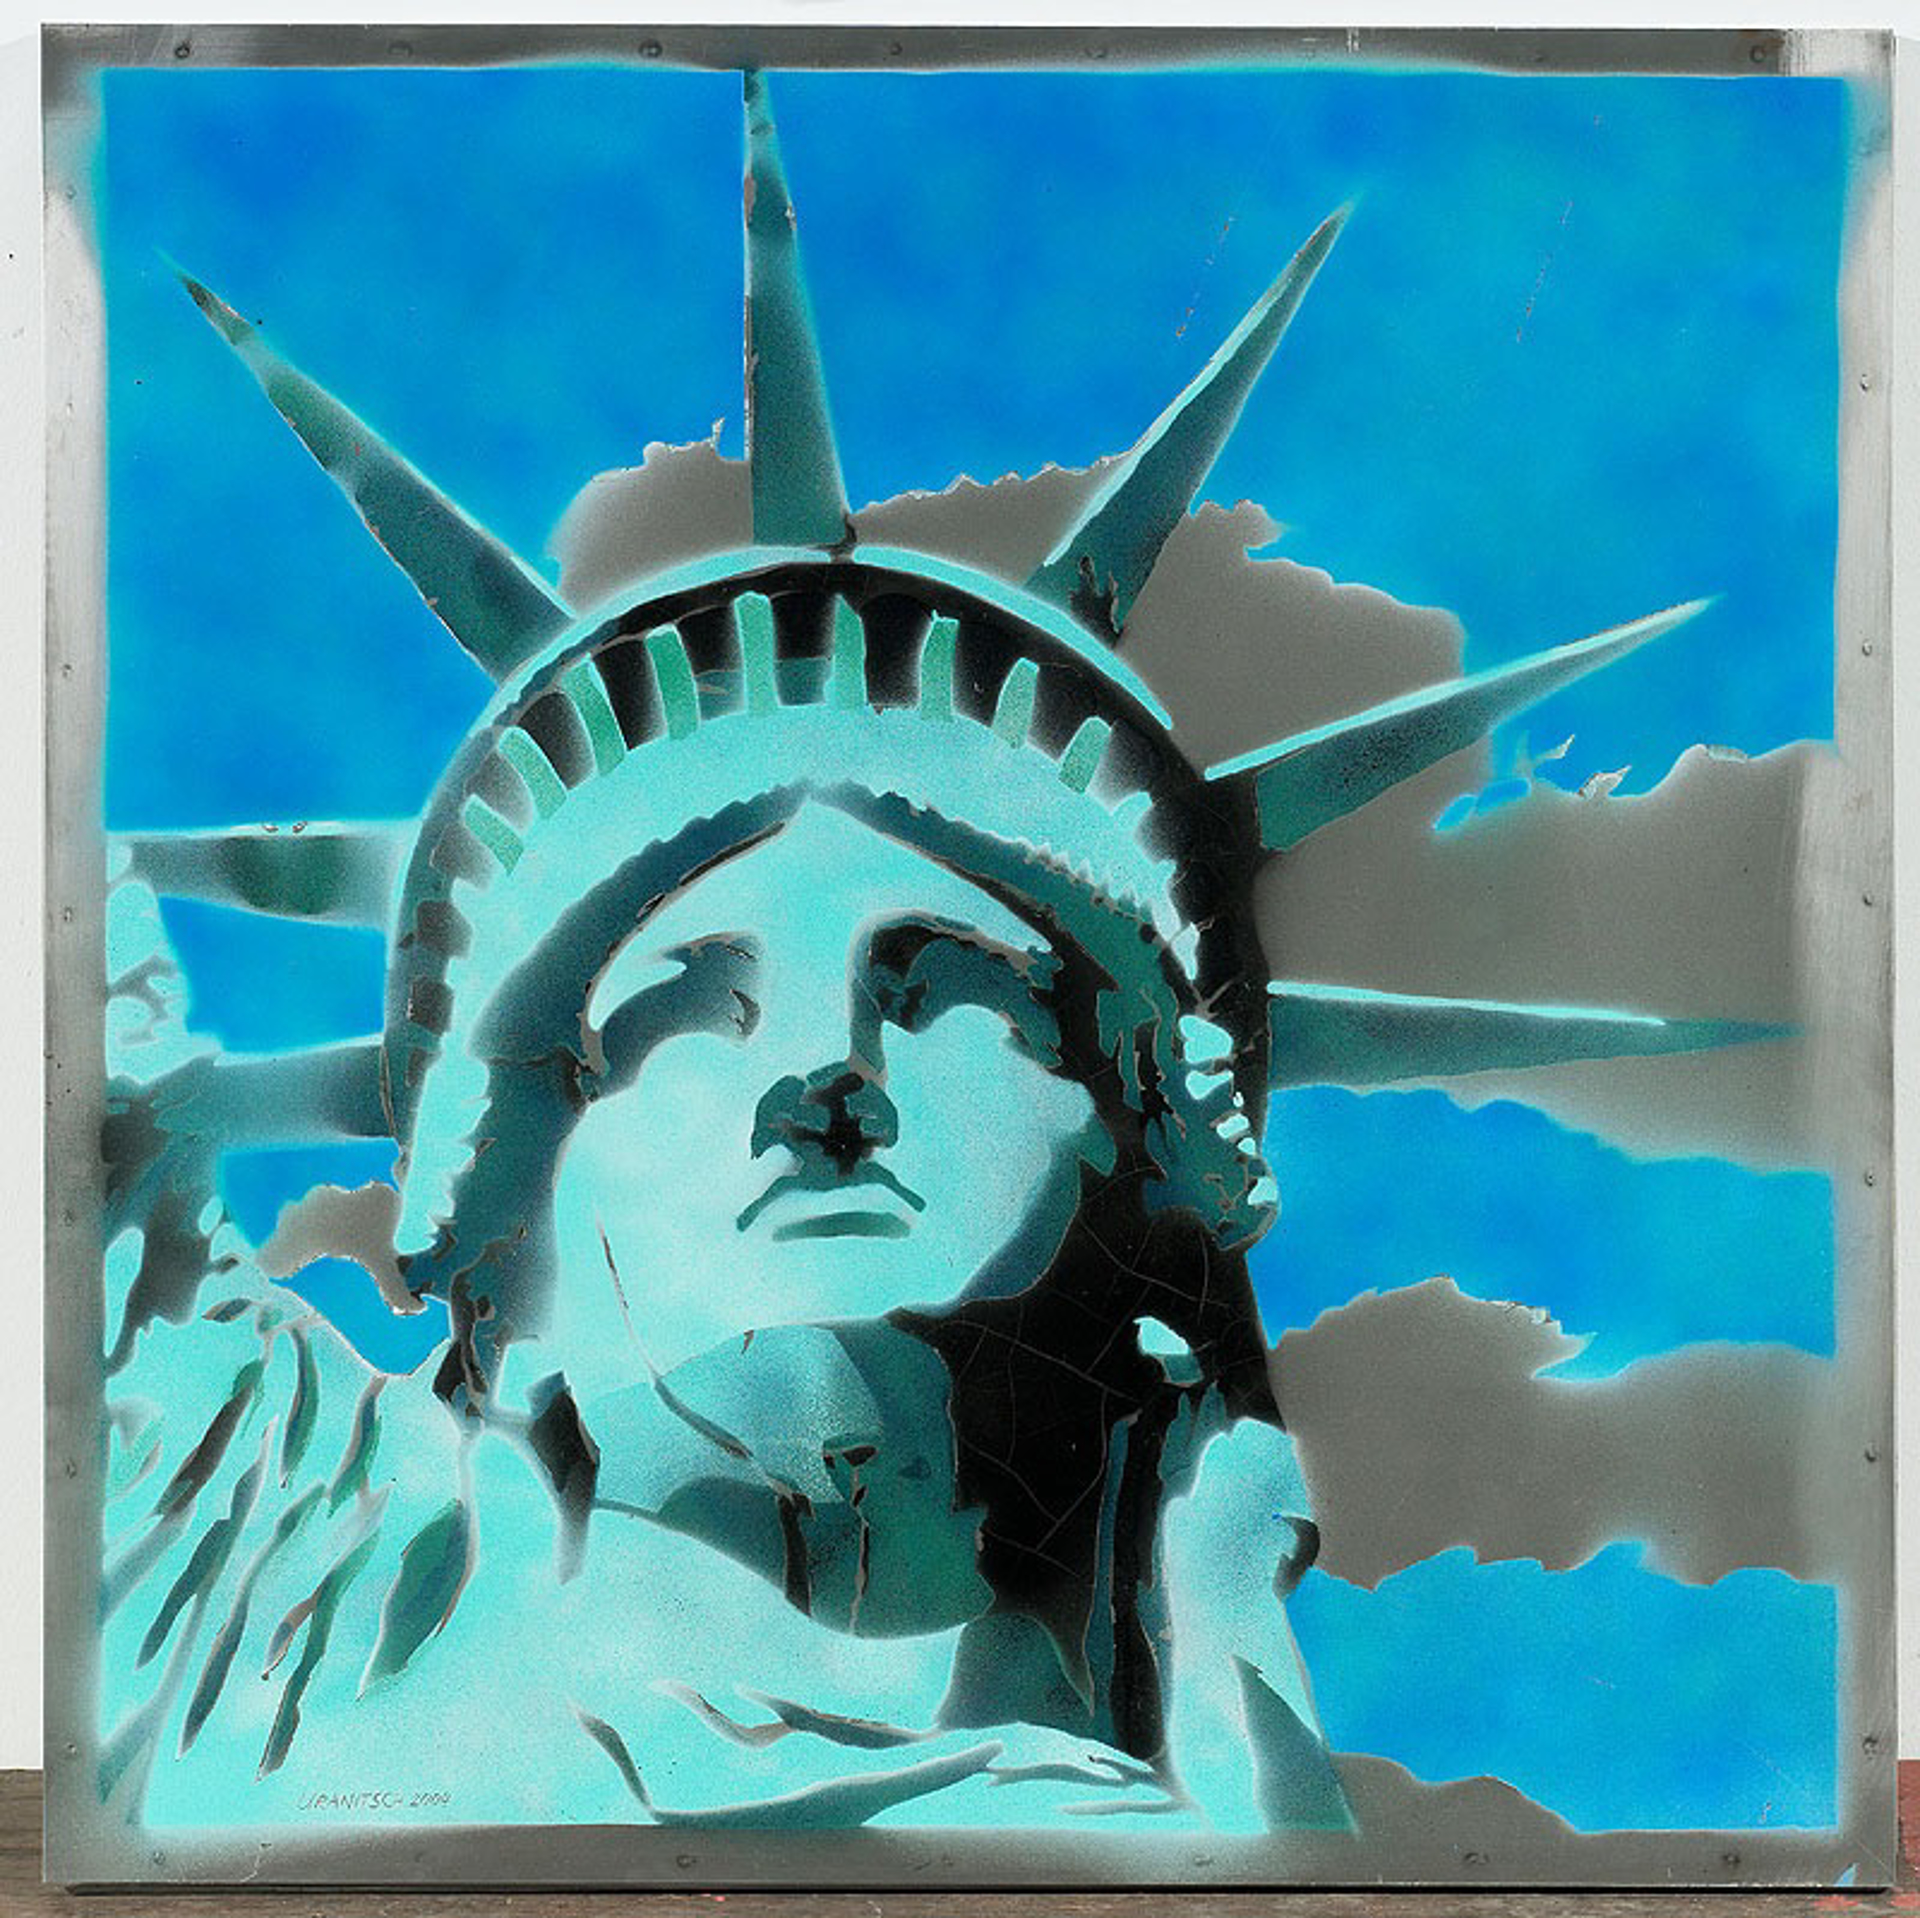 Statue of Liberty by Wolfgang Uranitsch